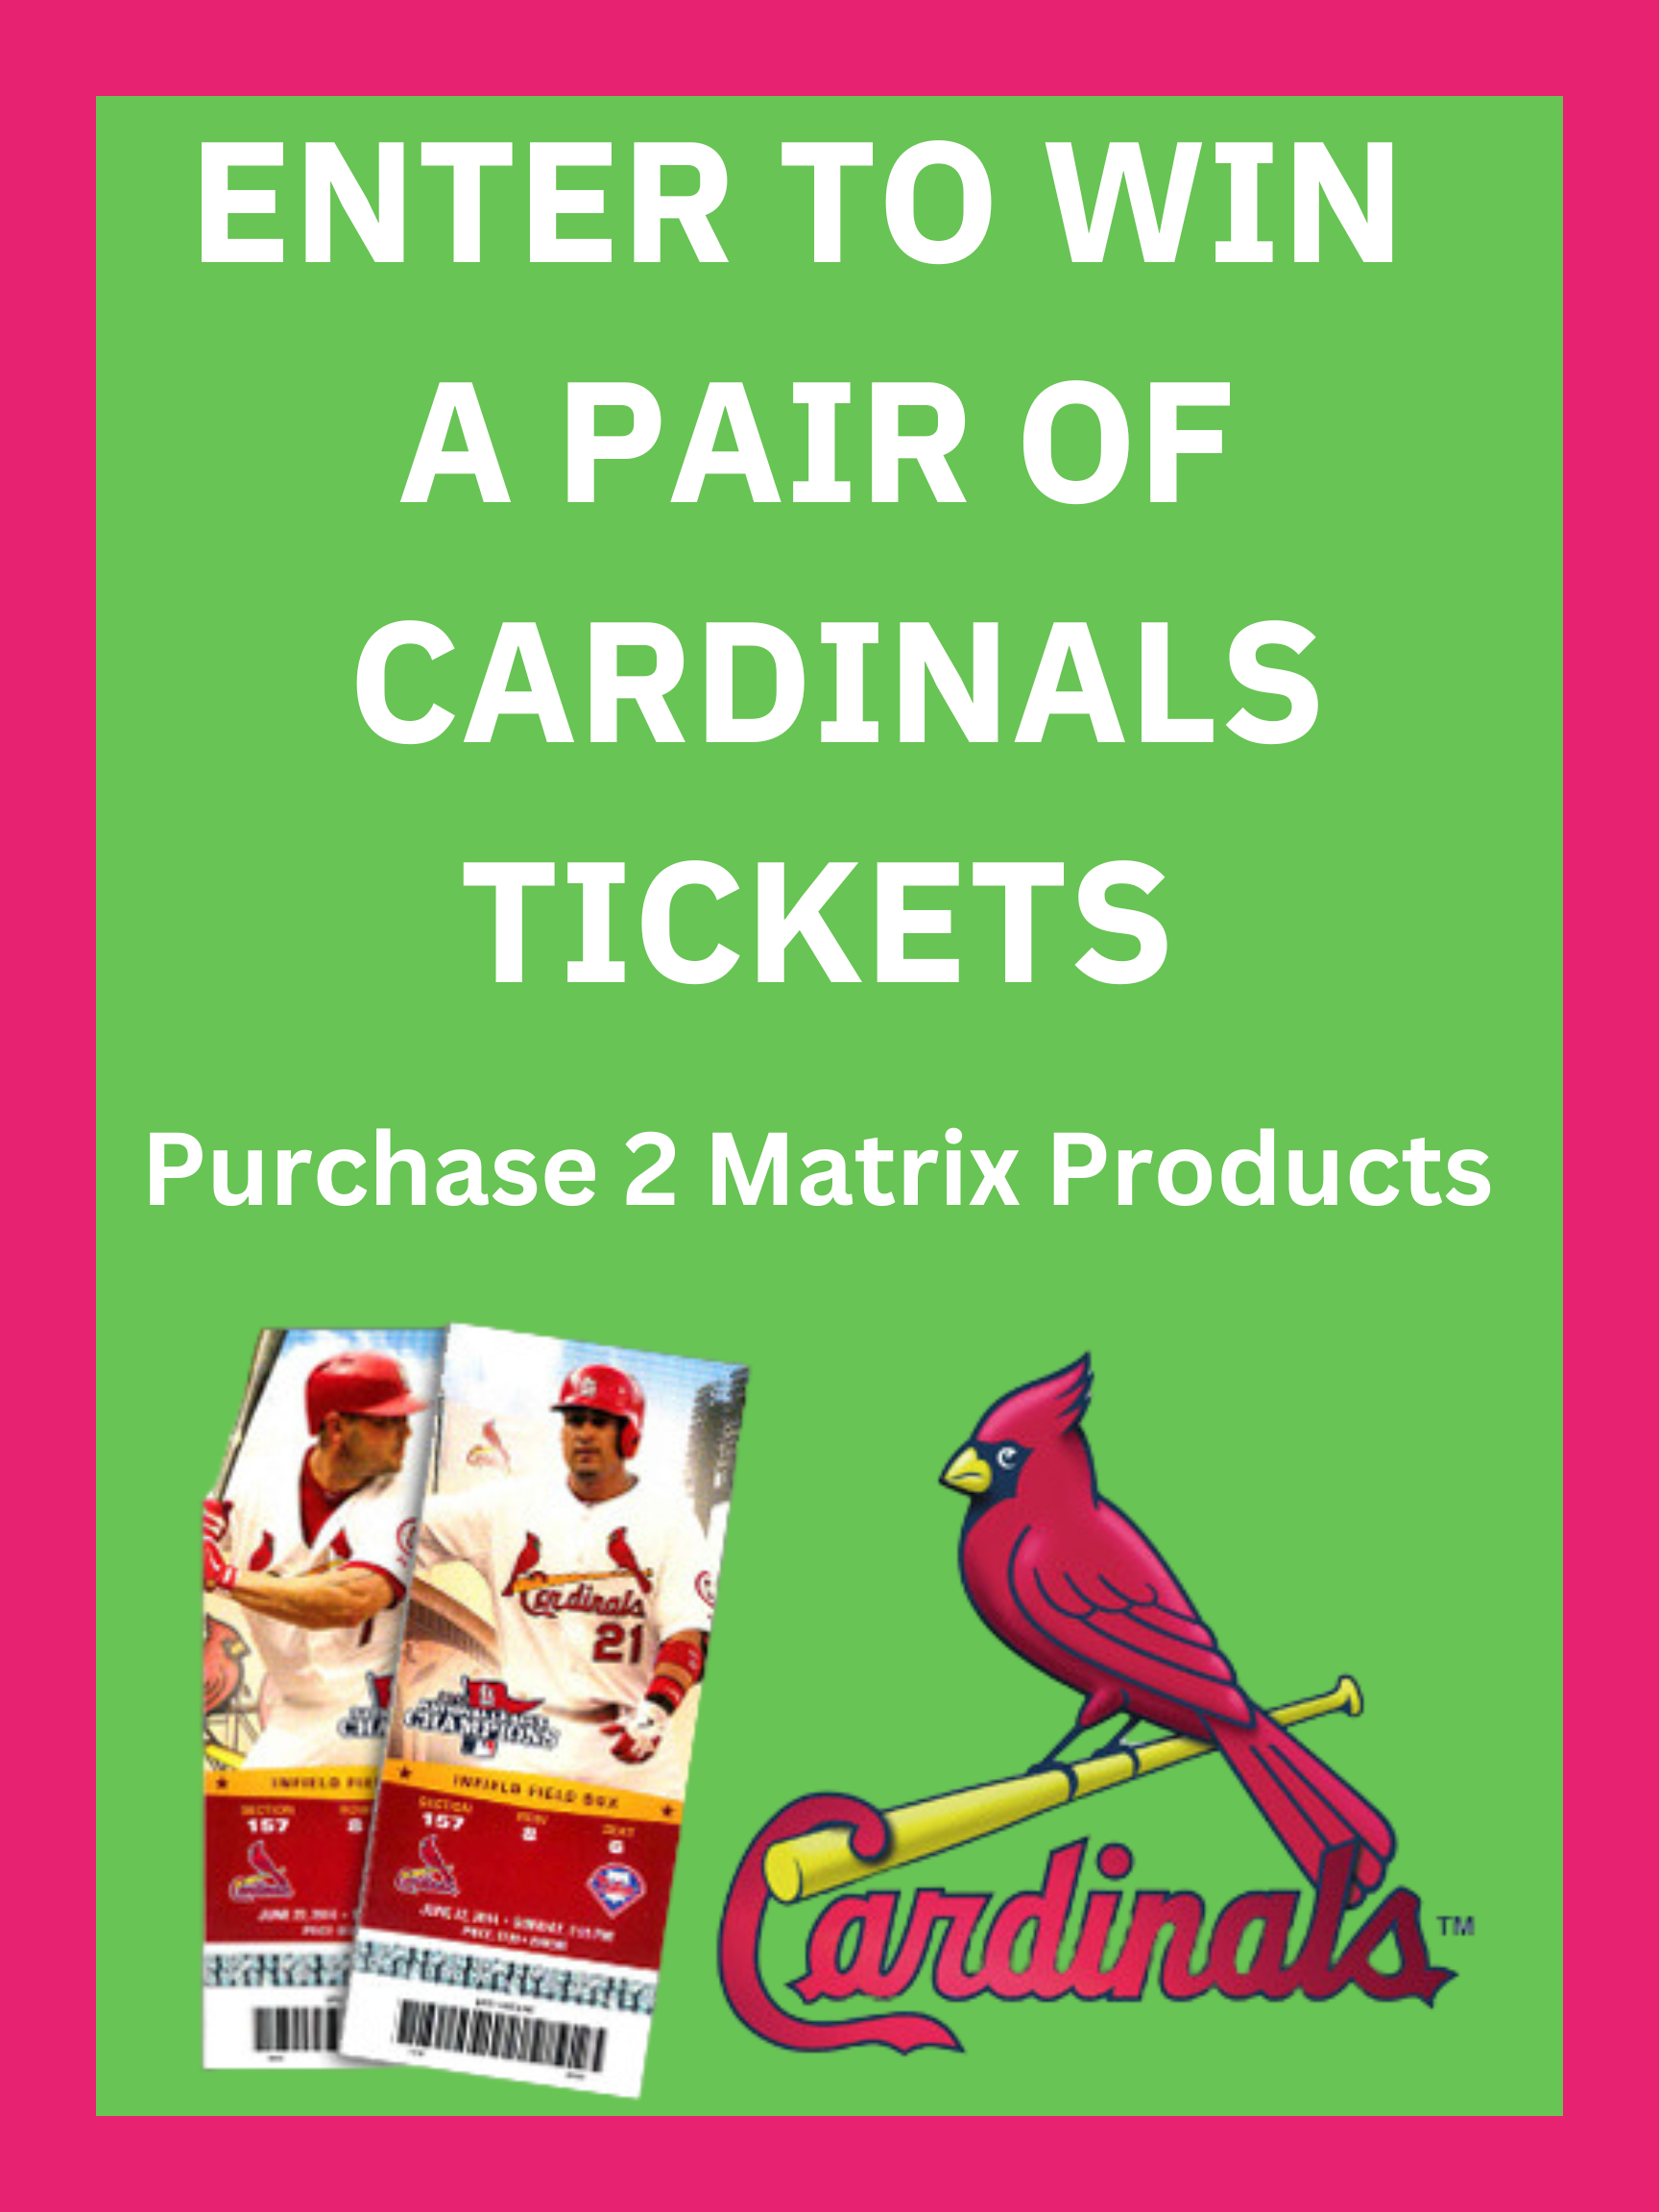 ENTER TO WIN A PAIR OF CARDINALS TICKETS for packet